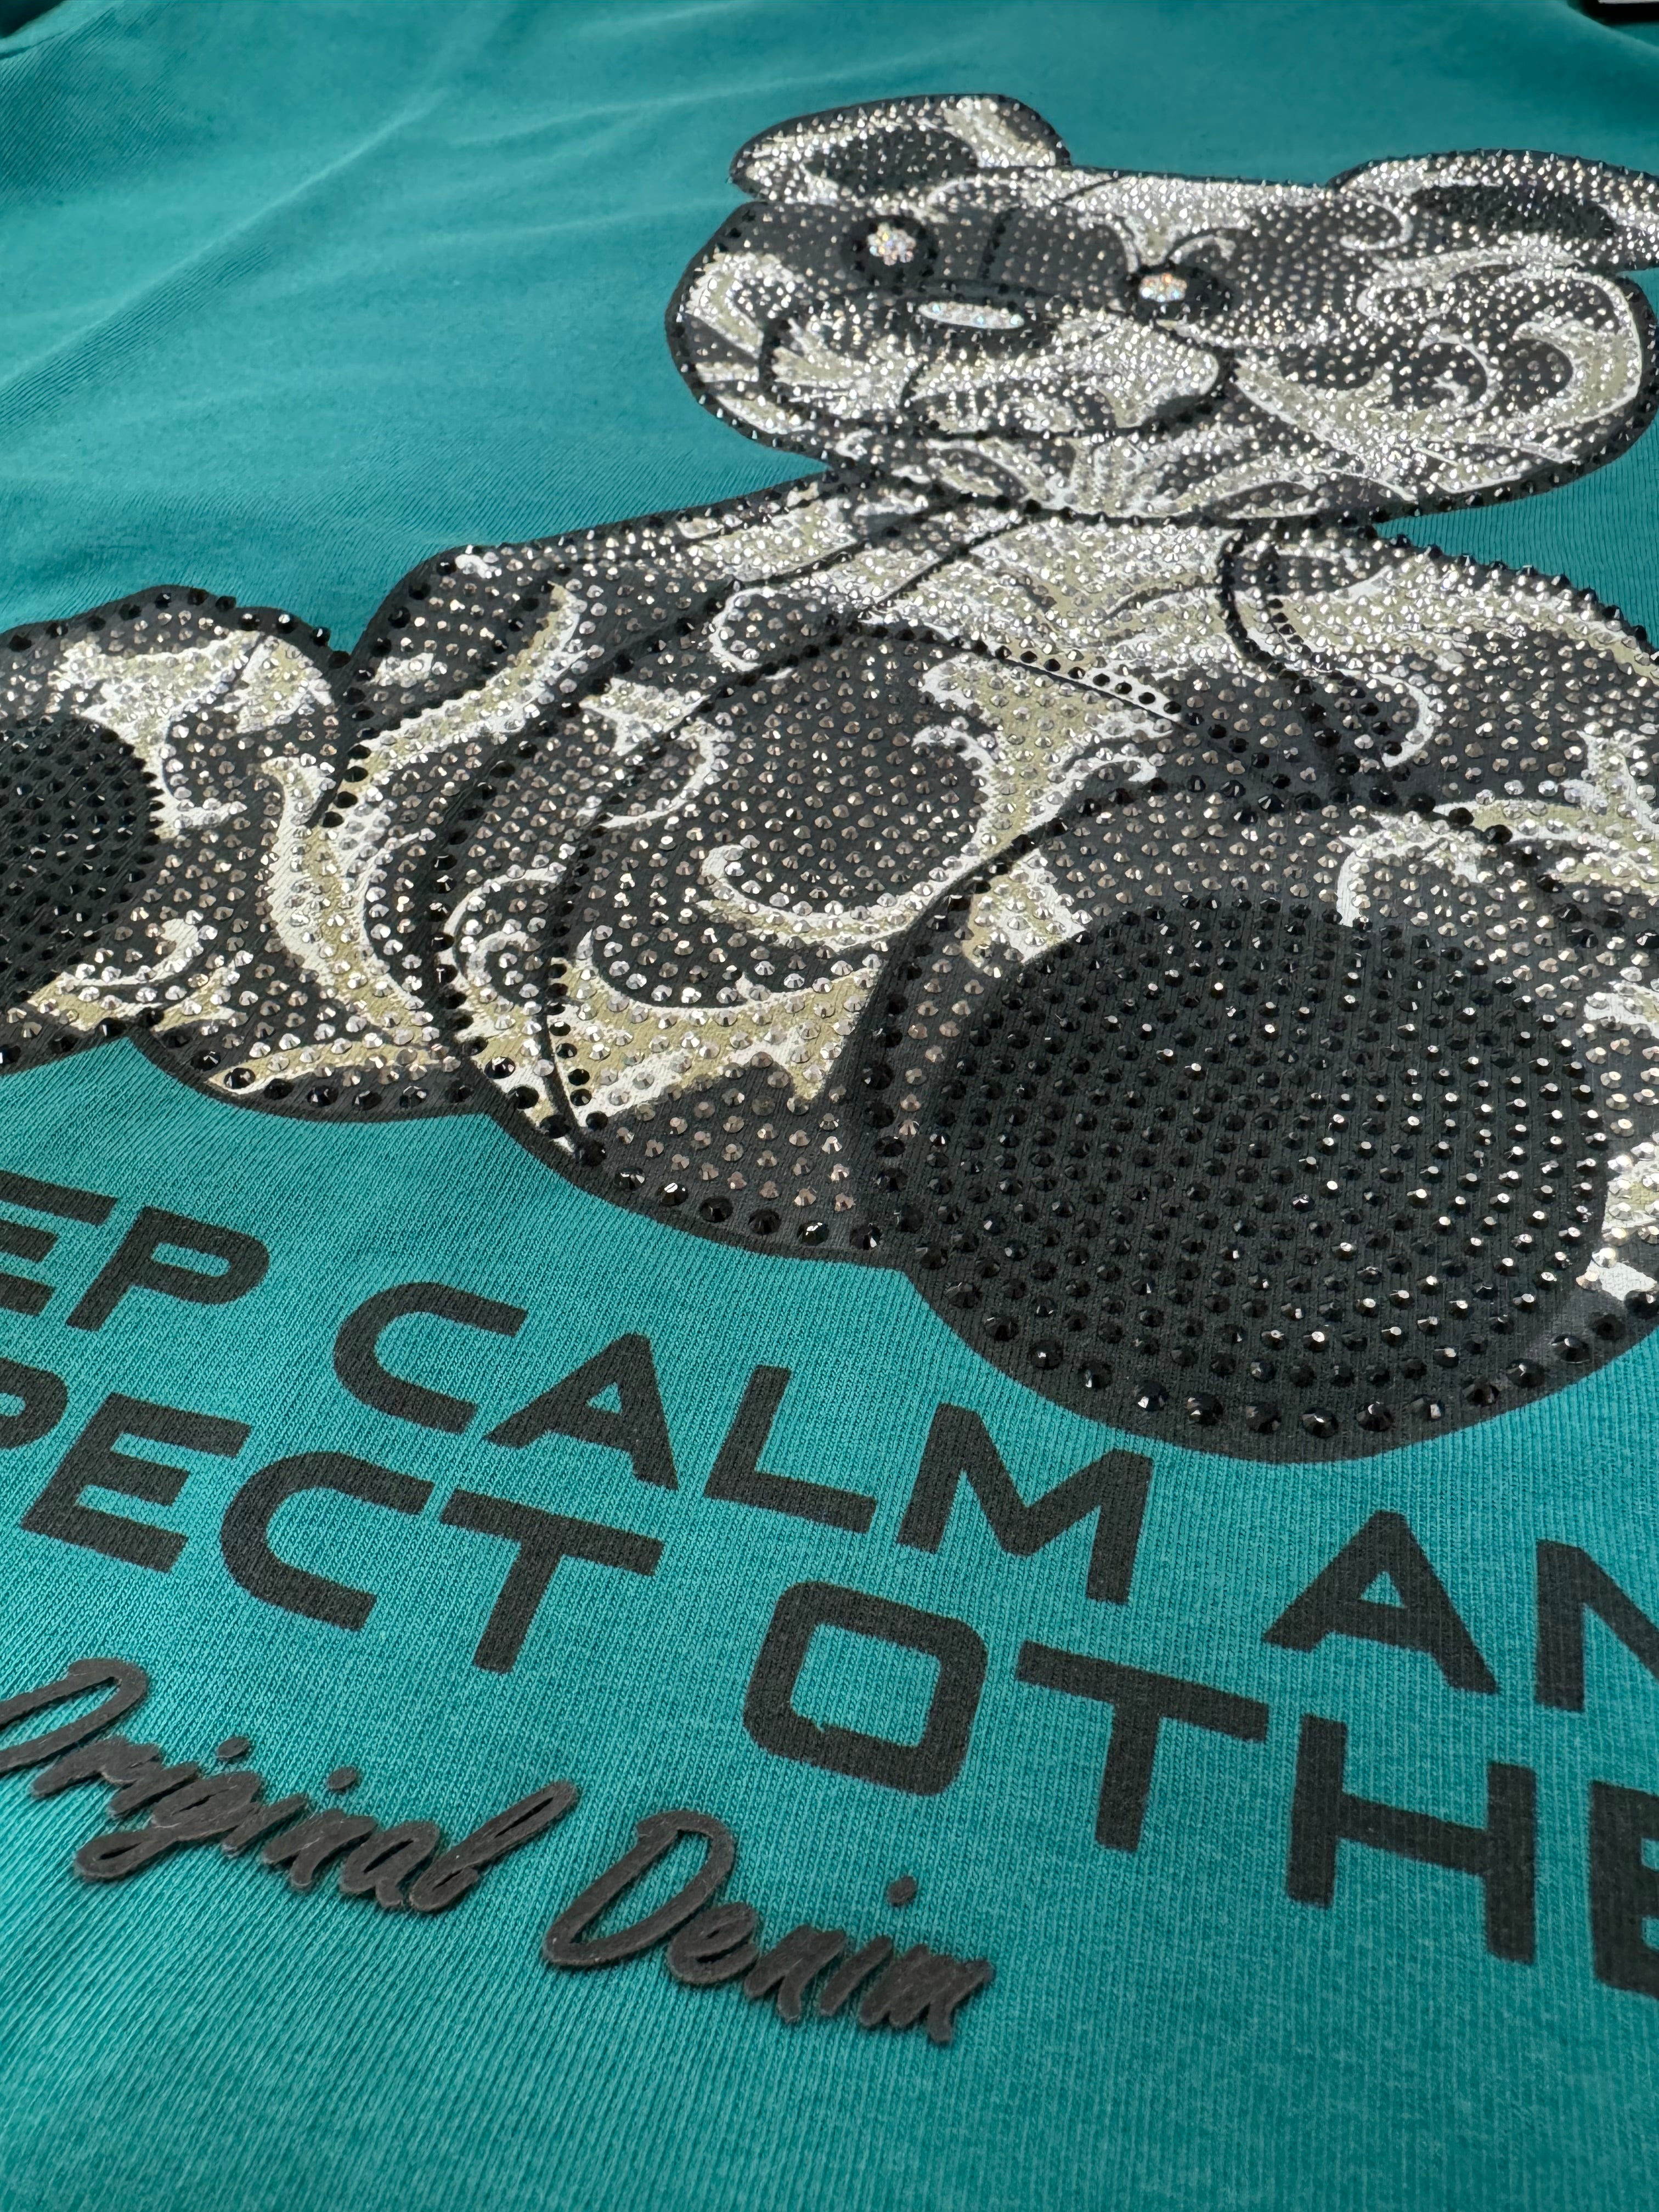 Keep Calm and Respect Others Teddy Bear Graphic Tee